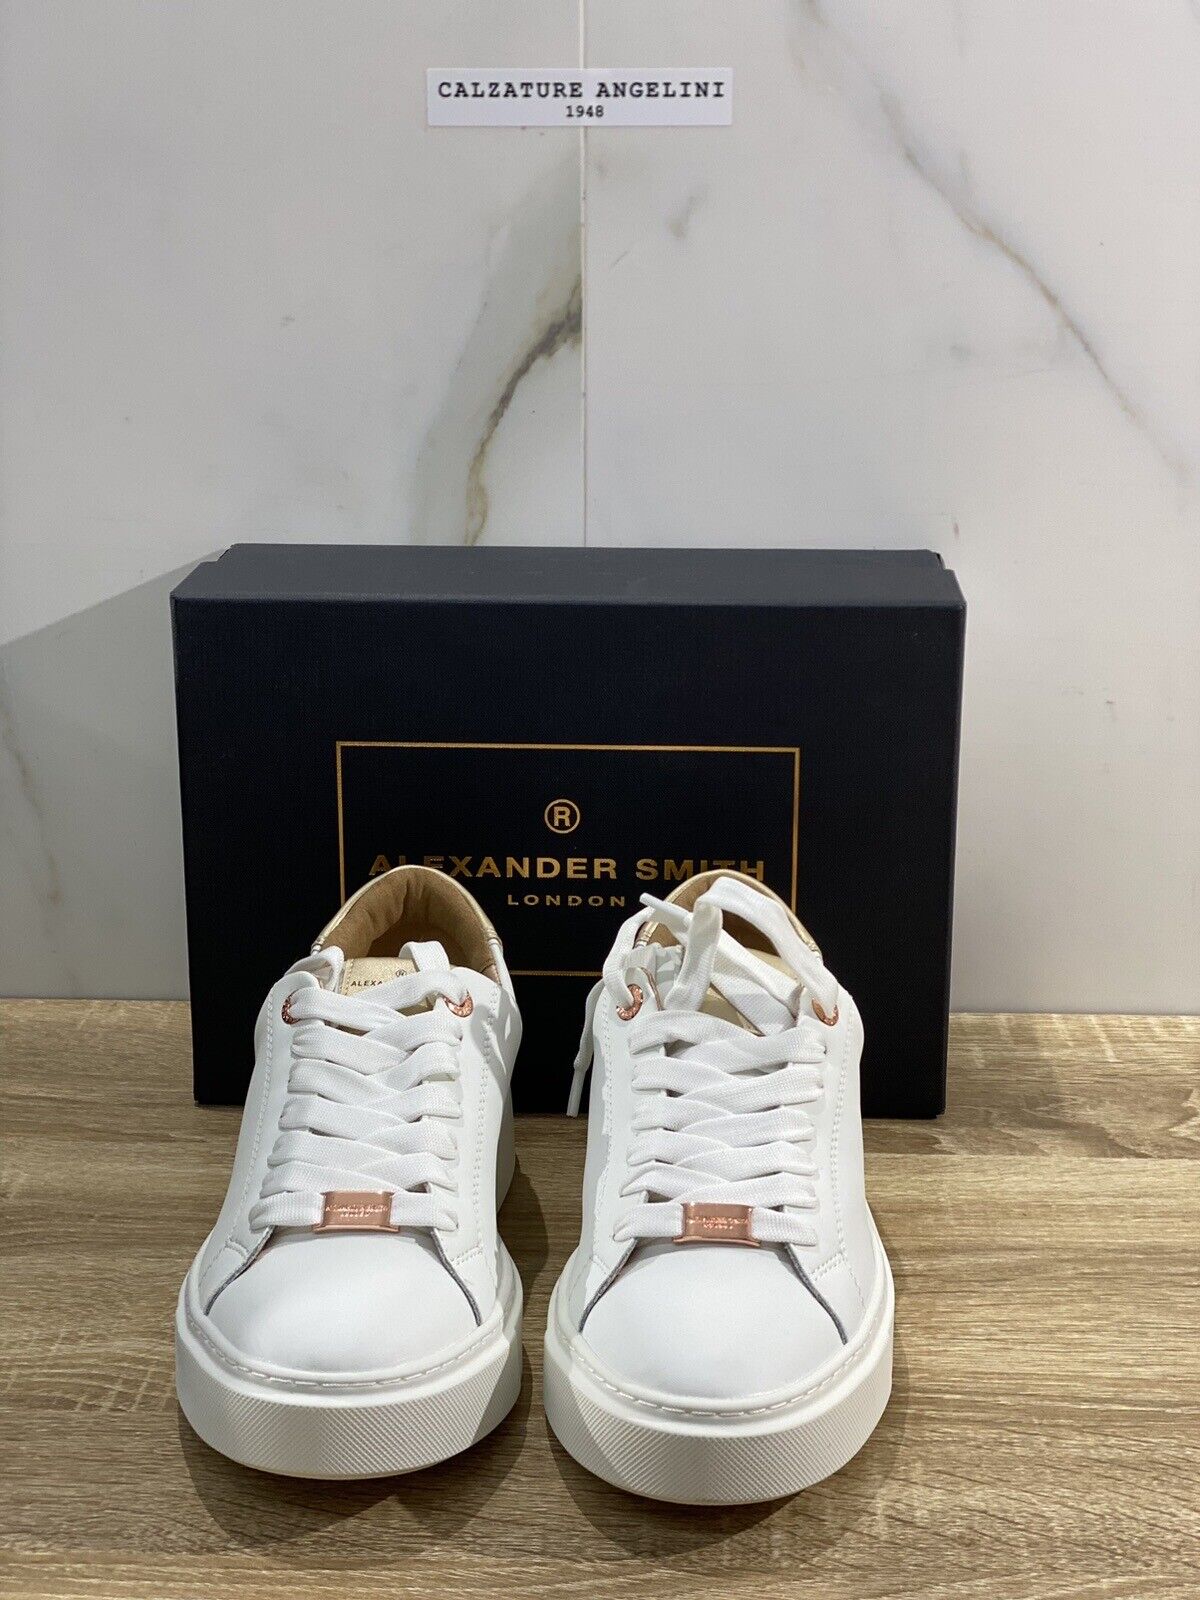 Alexander smith london sneaker donna in pelle White Gold Extra Light casual   40